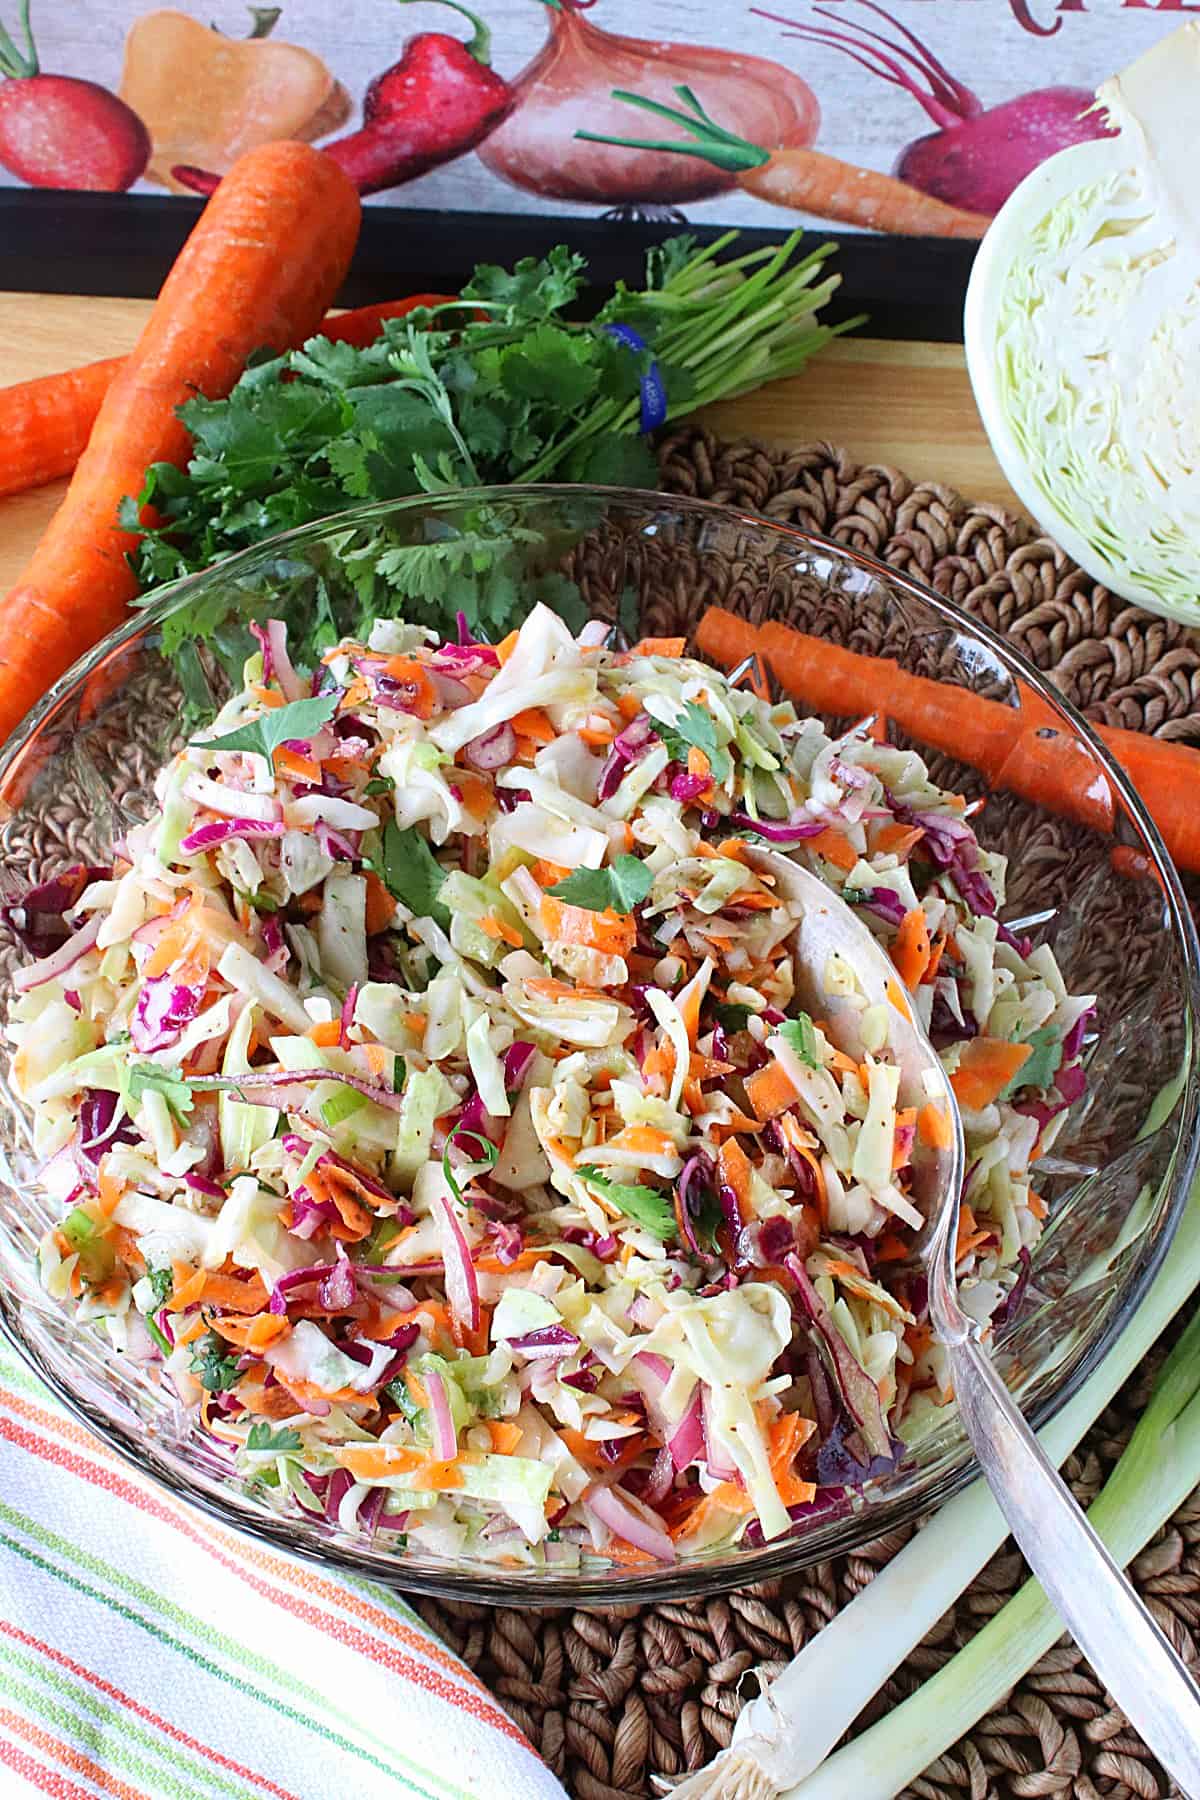 A glass bowl filled with a colorful No Mayo Sweet Sour Coleslaw with carrots and shredded cabbage.